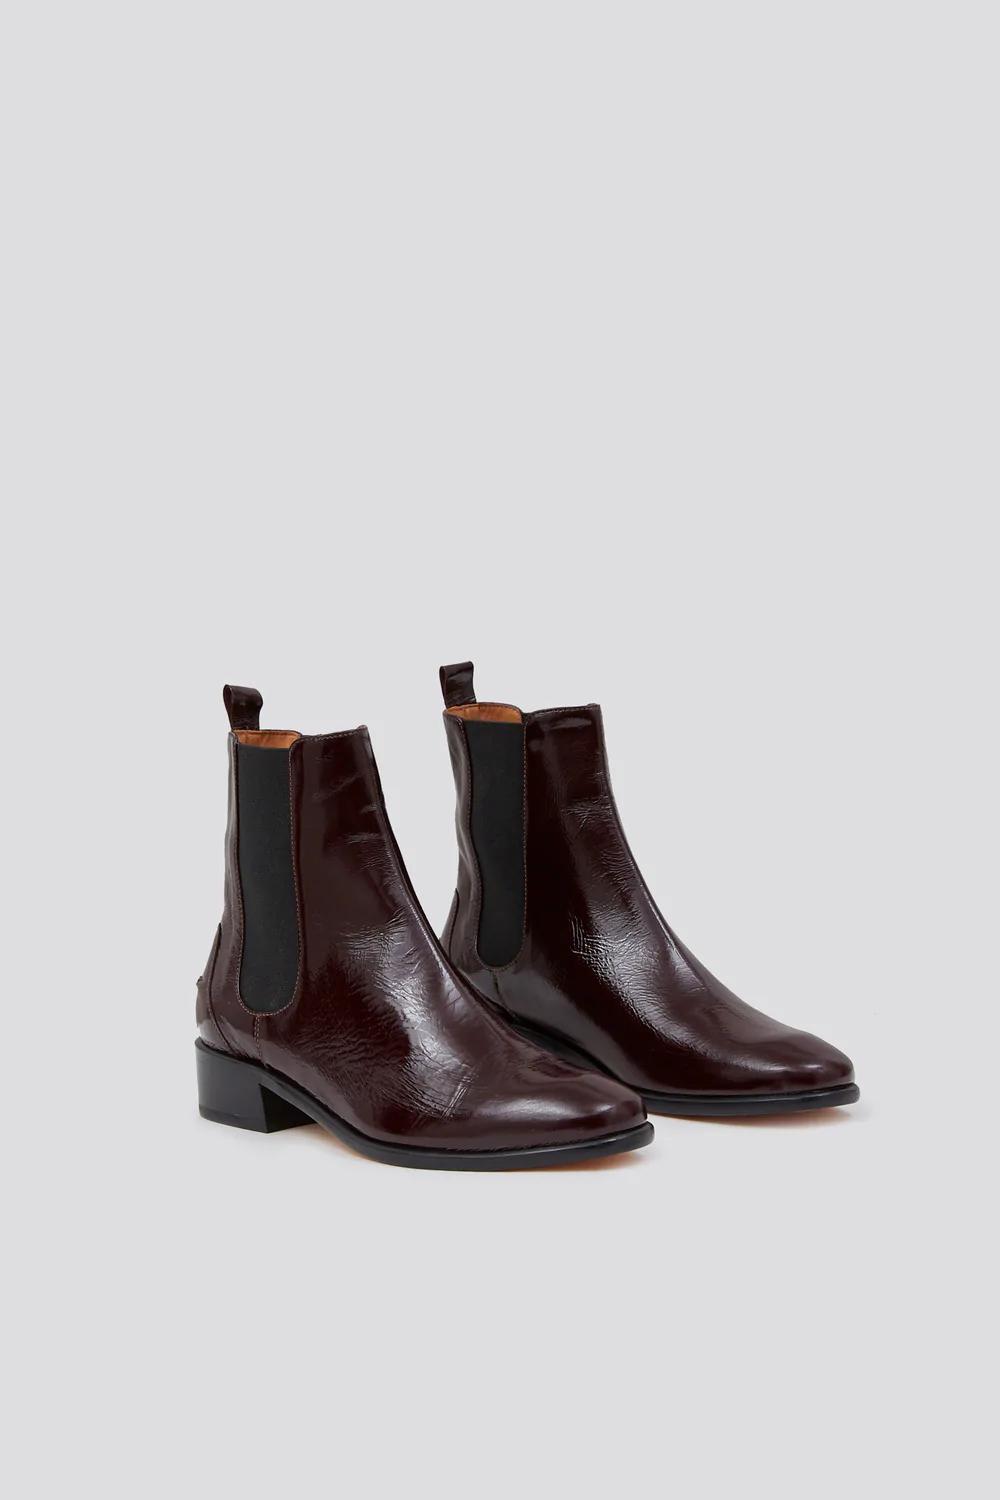 Product Image for Thora Boot, Cherry